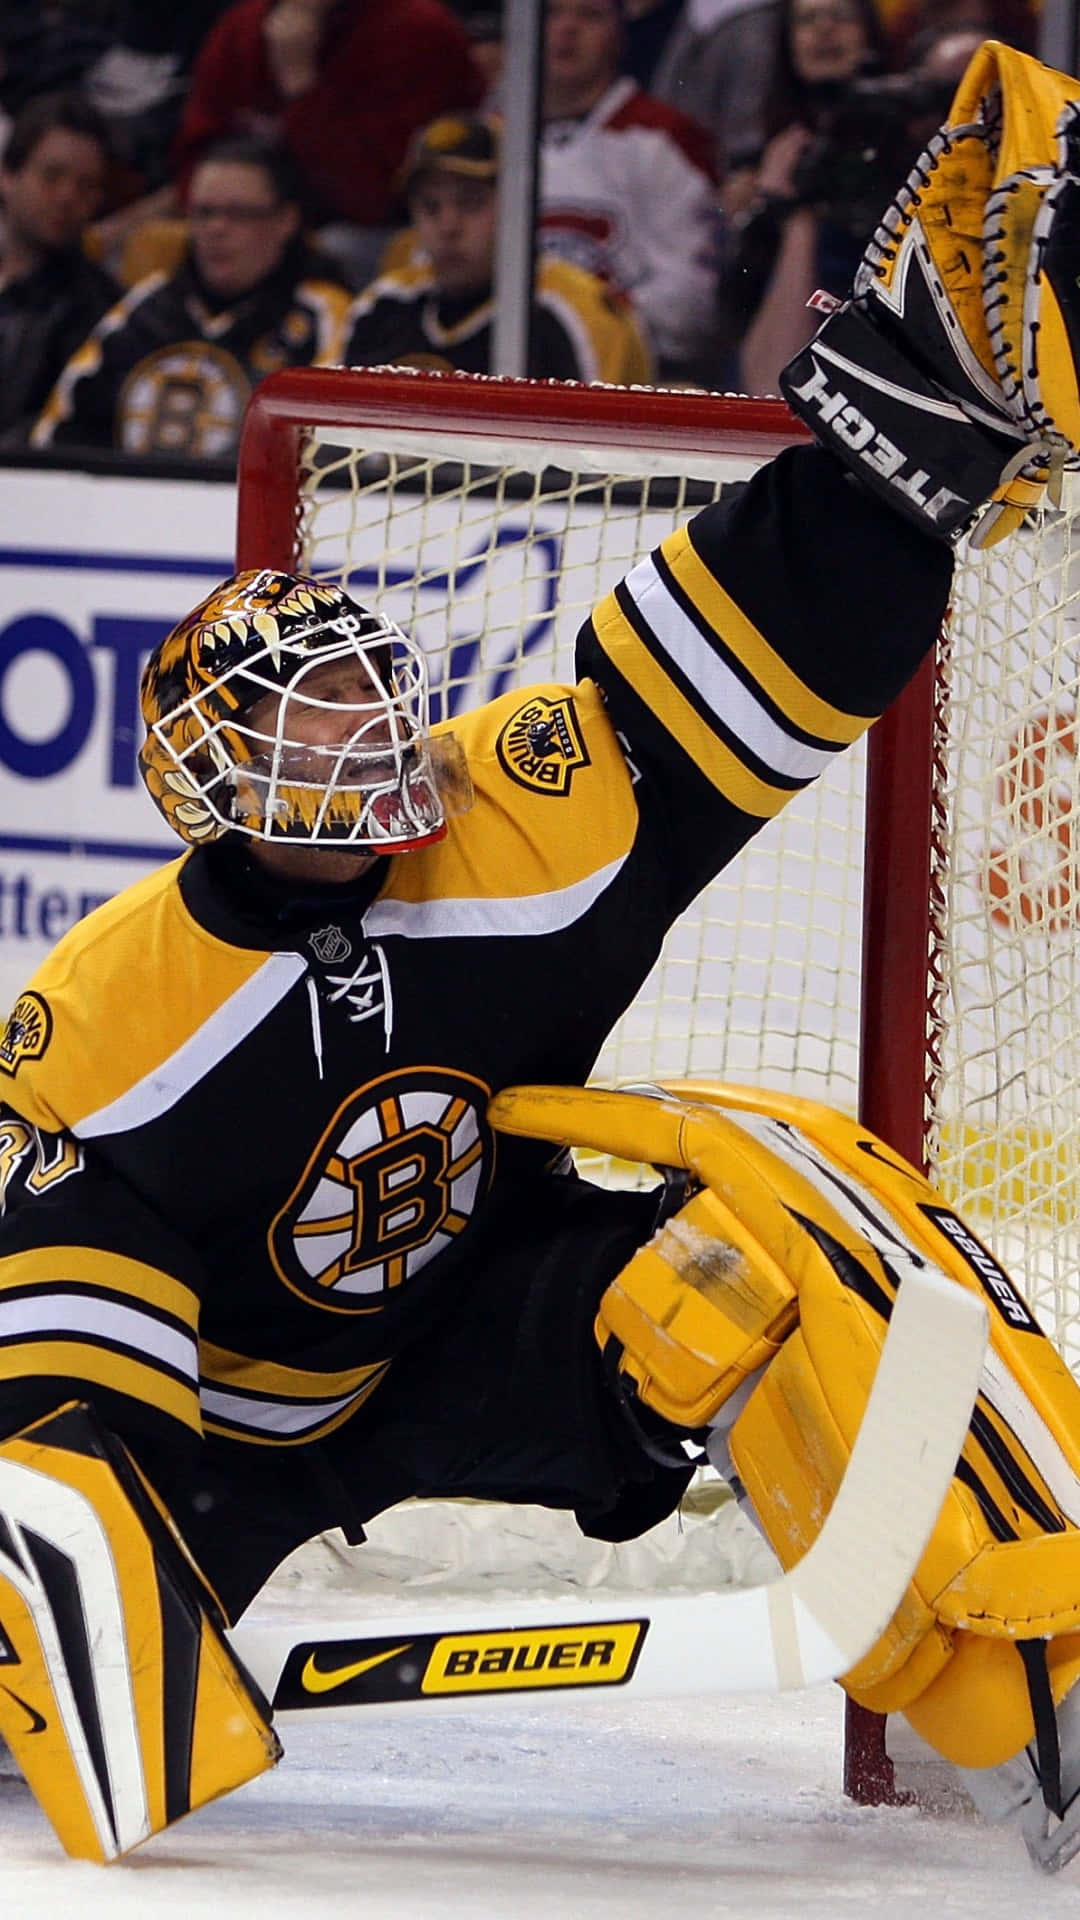 “Boston Bruins – the Pride of the Eastern Conference”